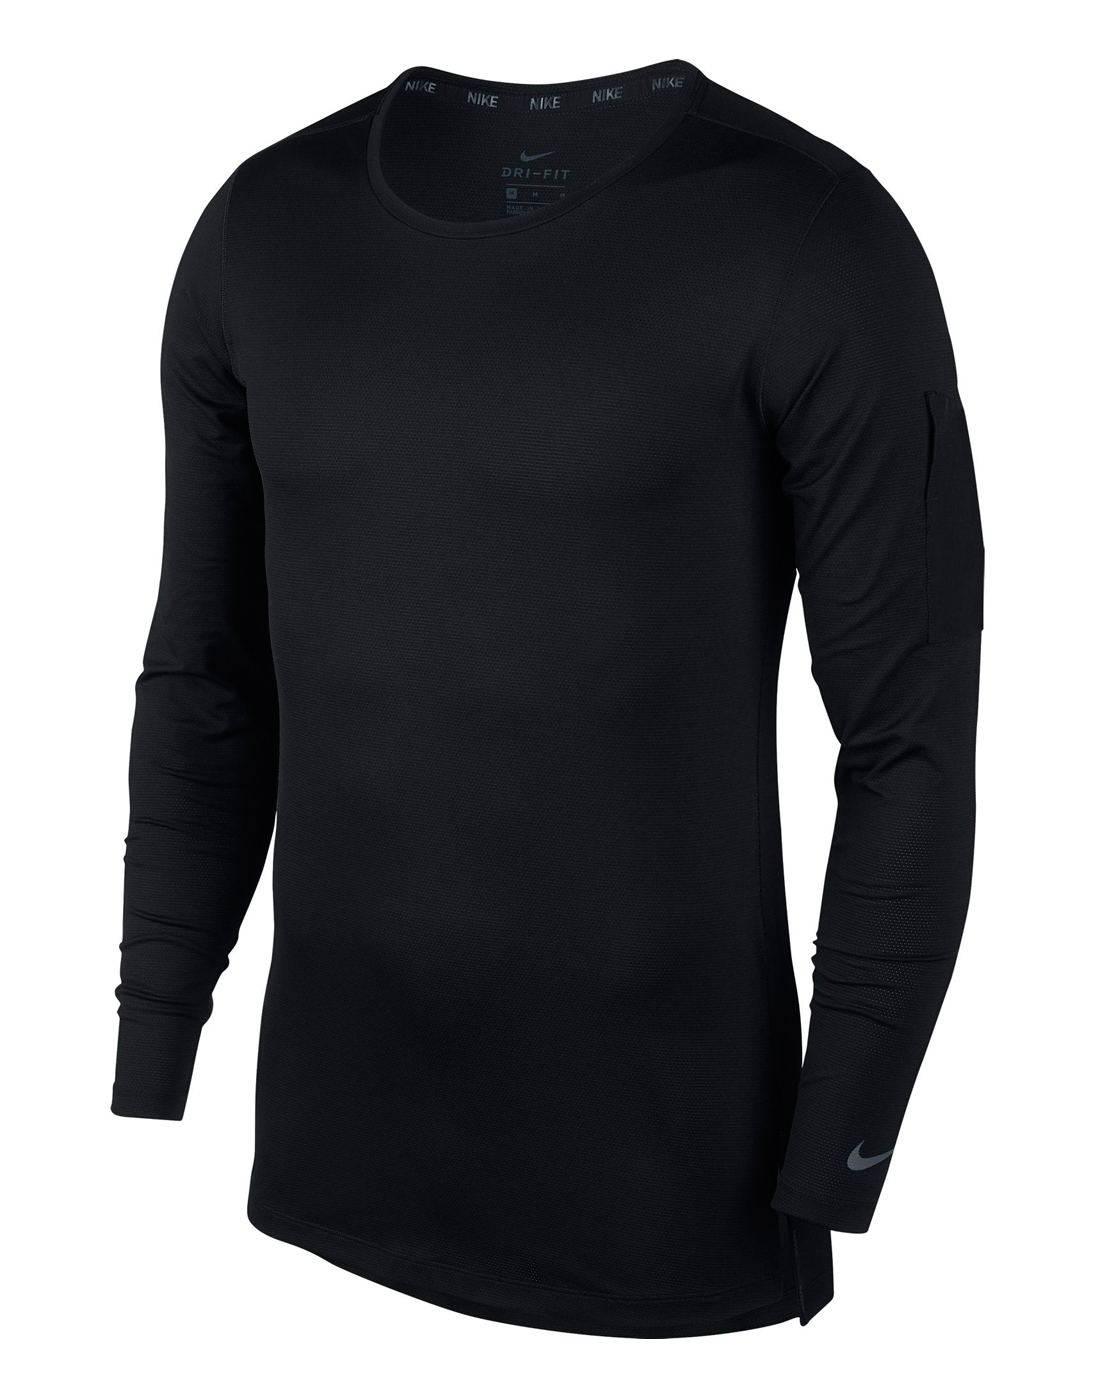 Nike Mens Pro Modern Fitted Top | Black | Life Style Sports